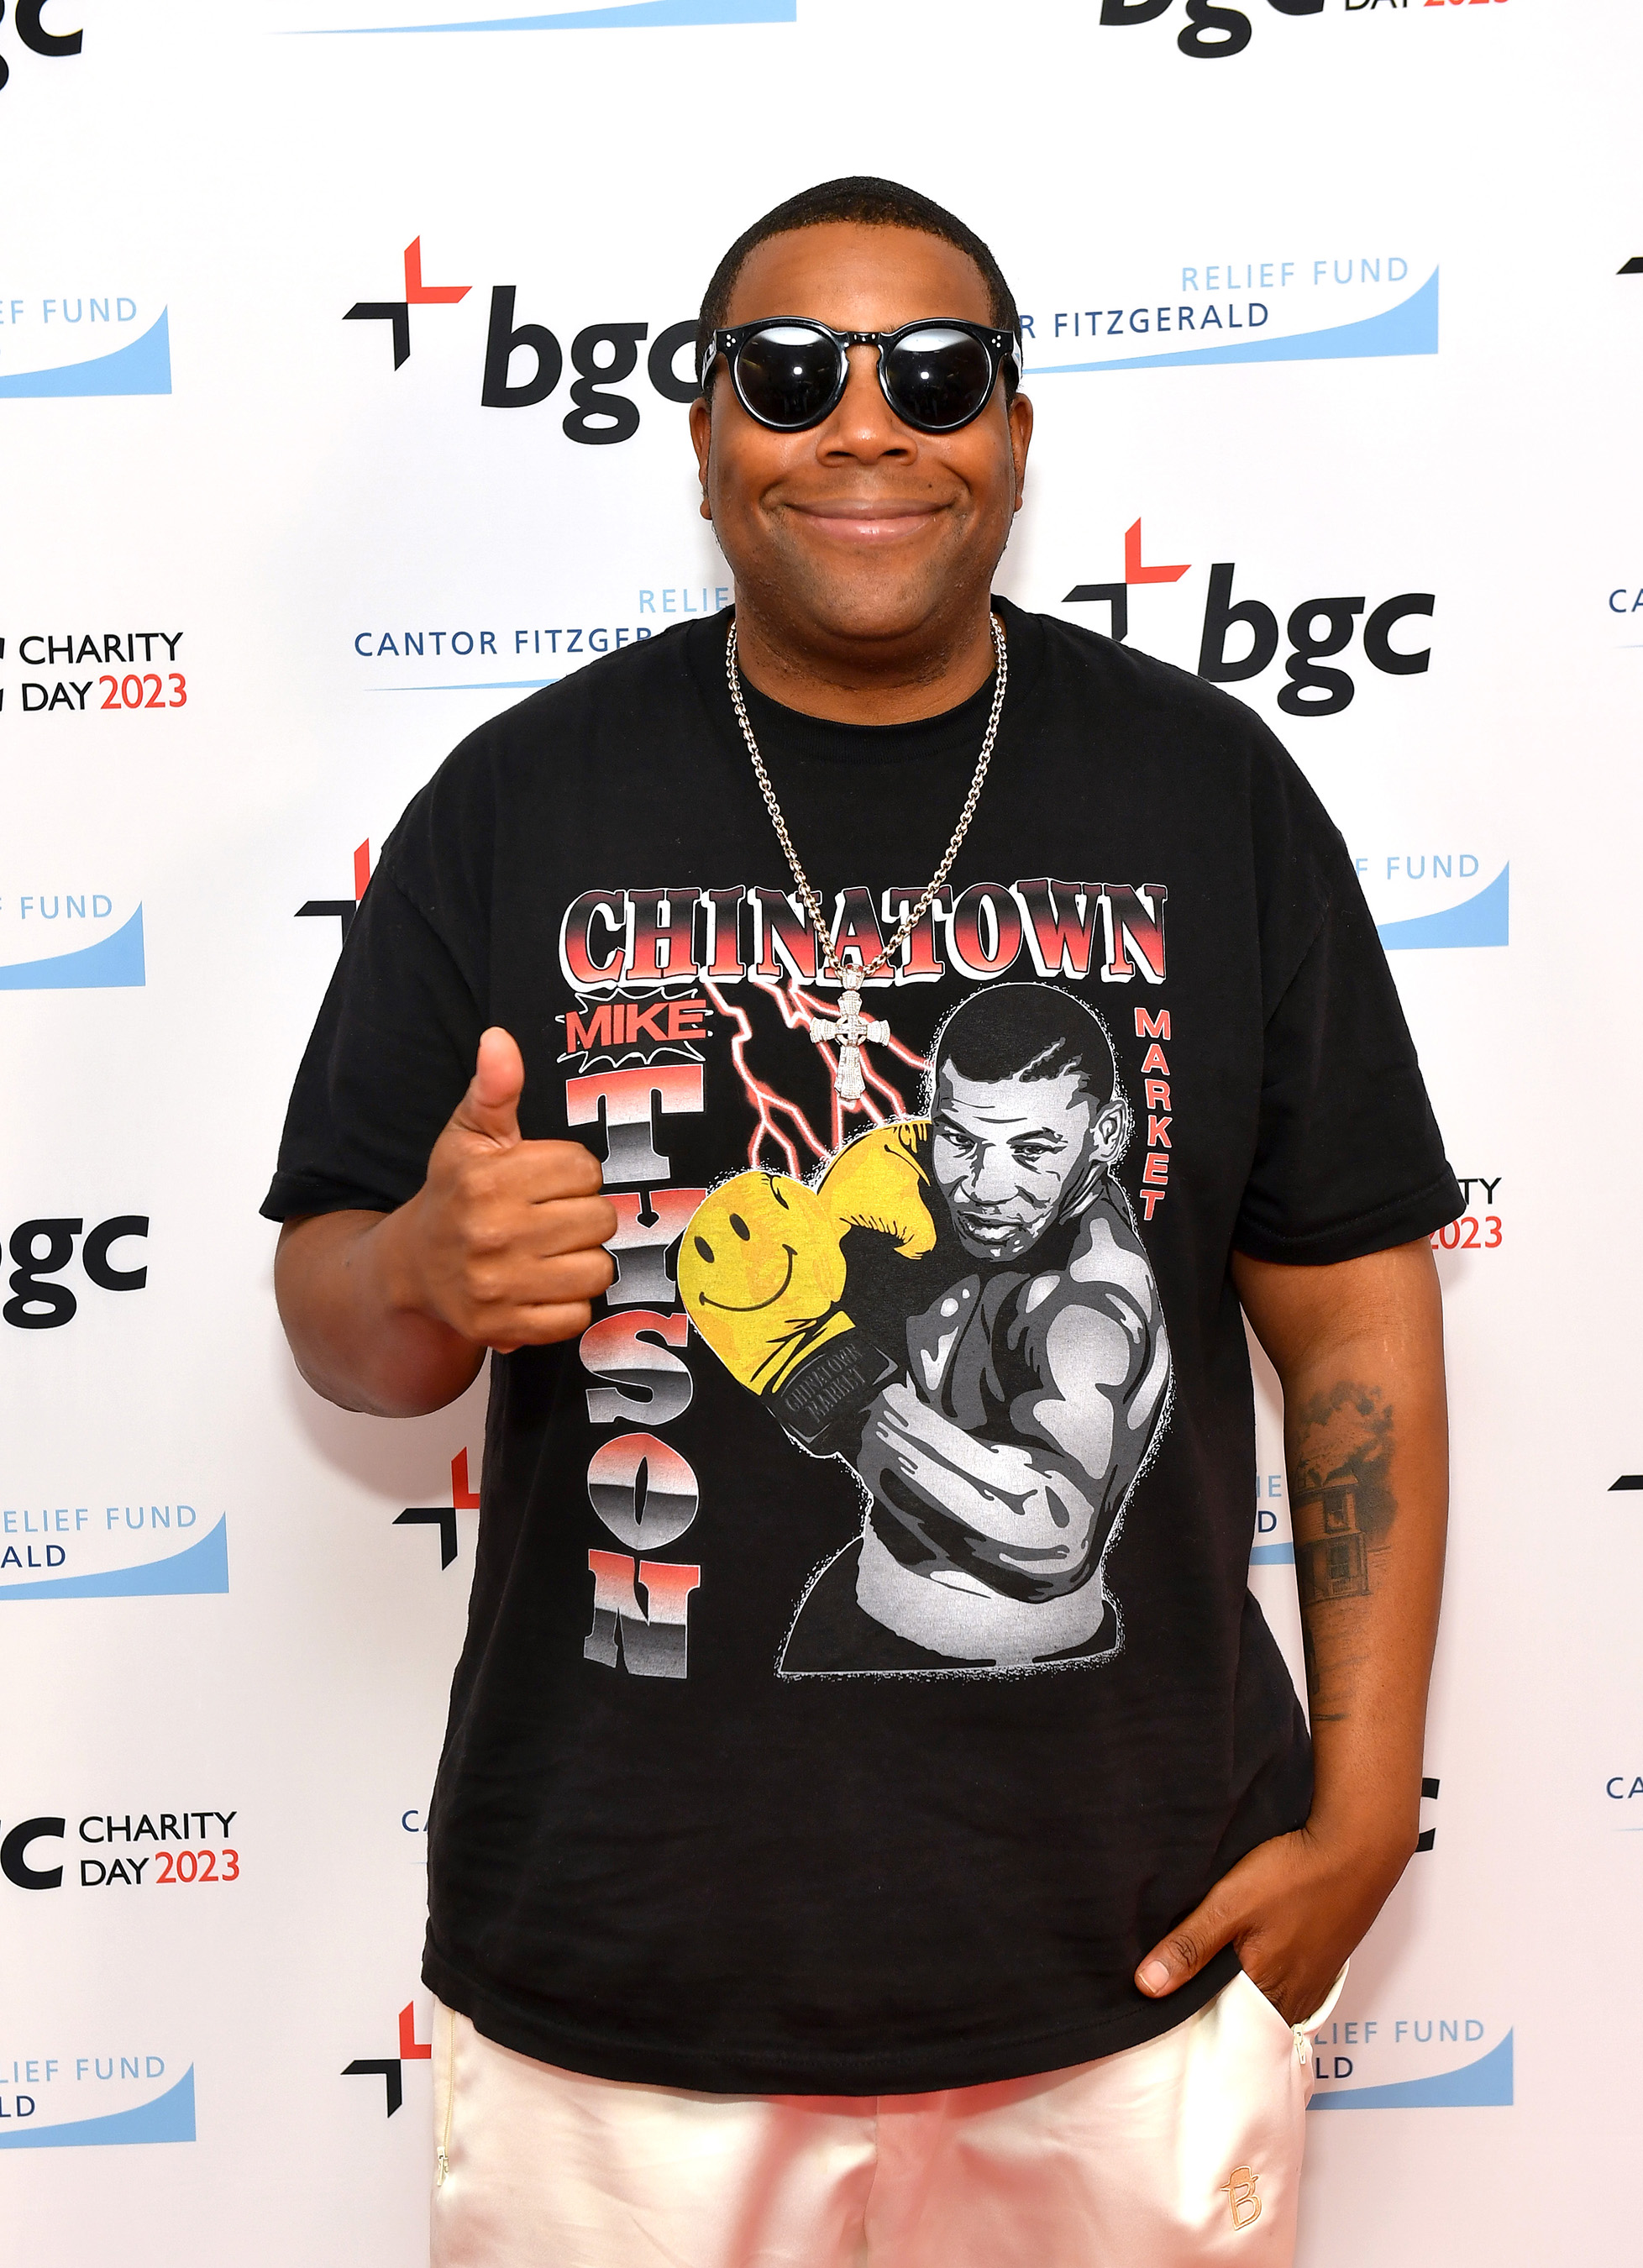 Kenan Thompson helped raise spirits and funds during BGC Group’s annual Charity Day event honoring those lost 22 years ago on September 11th.